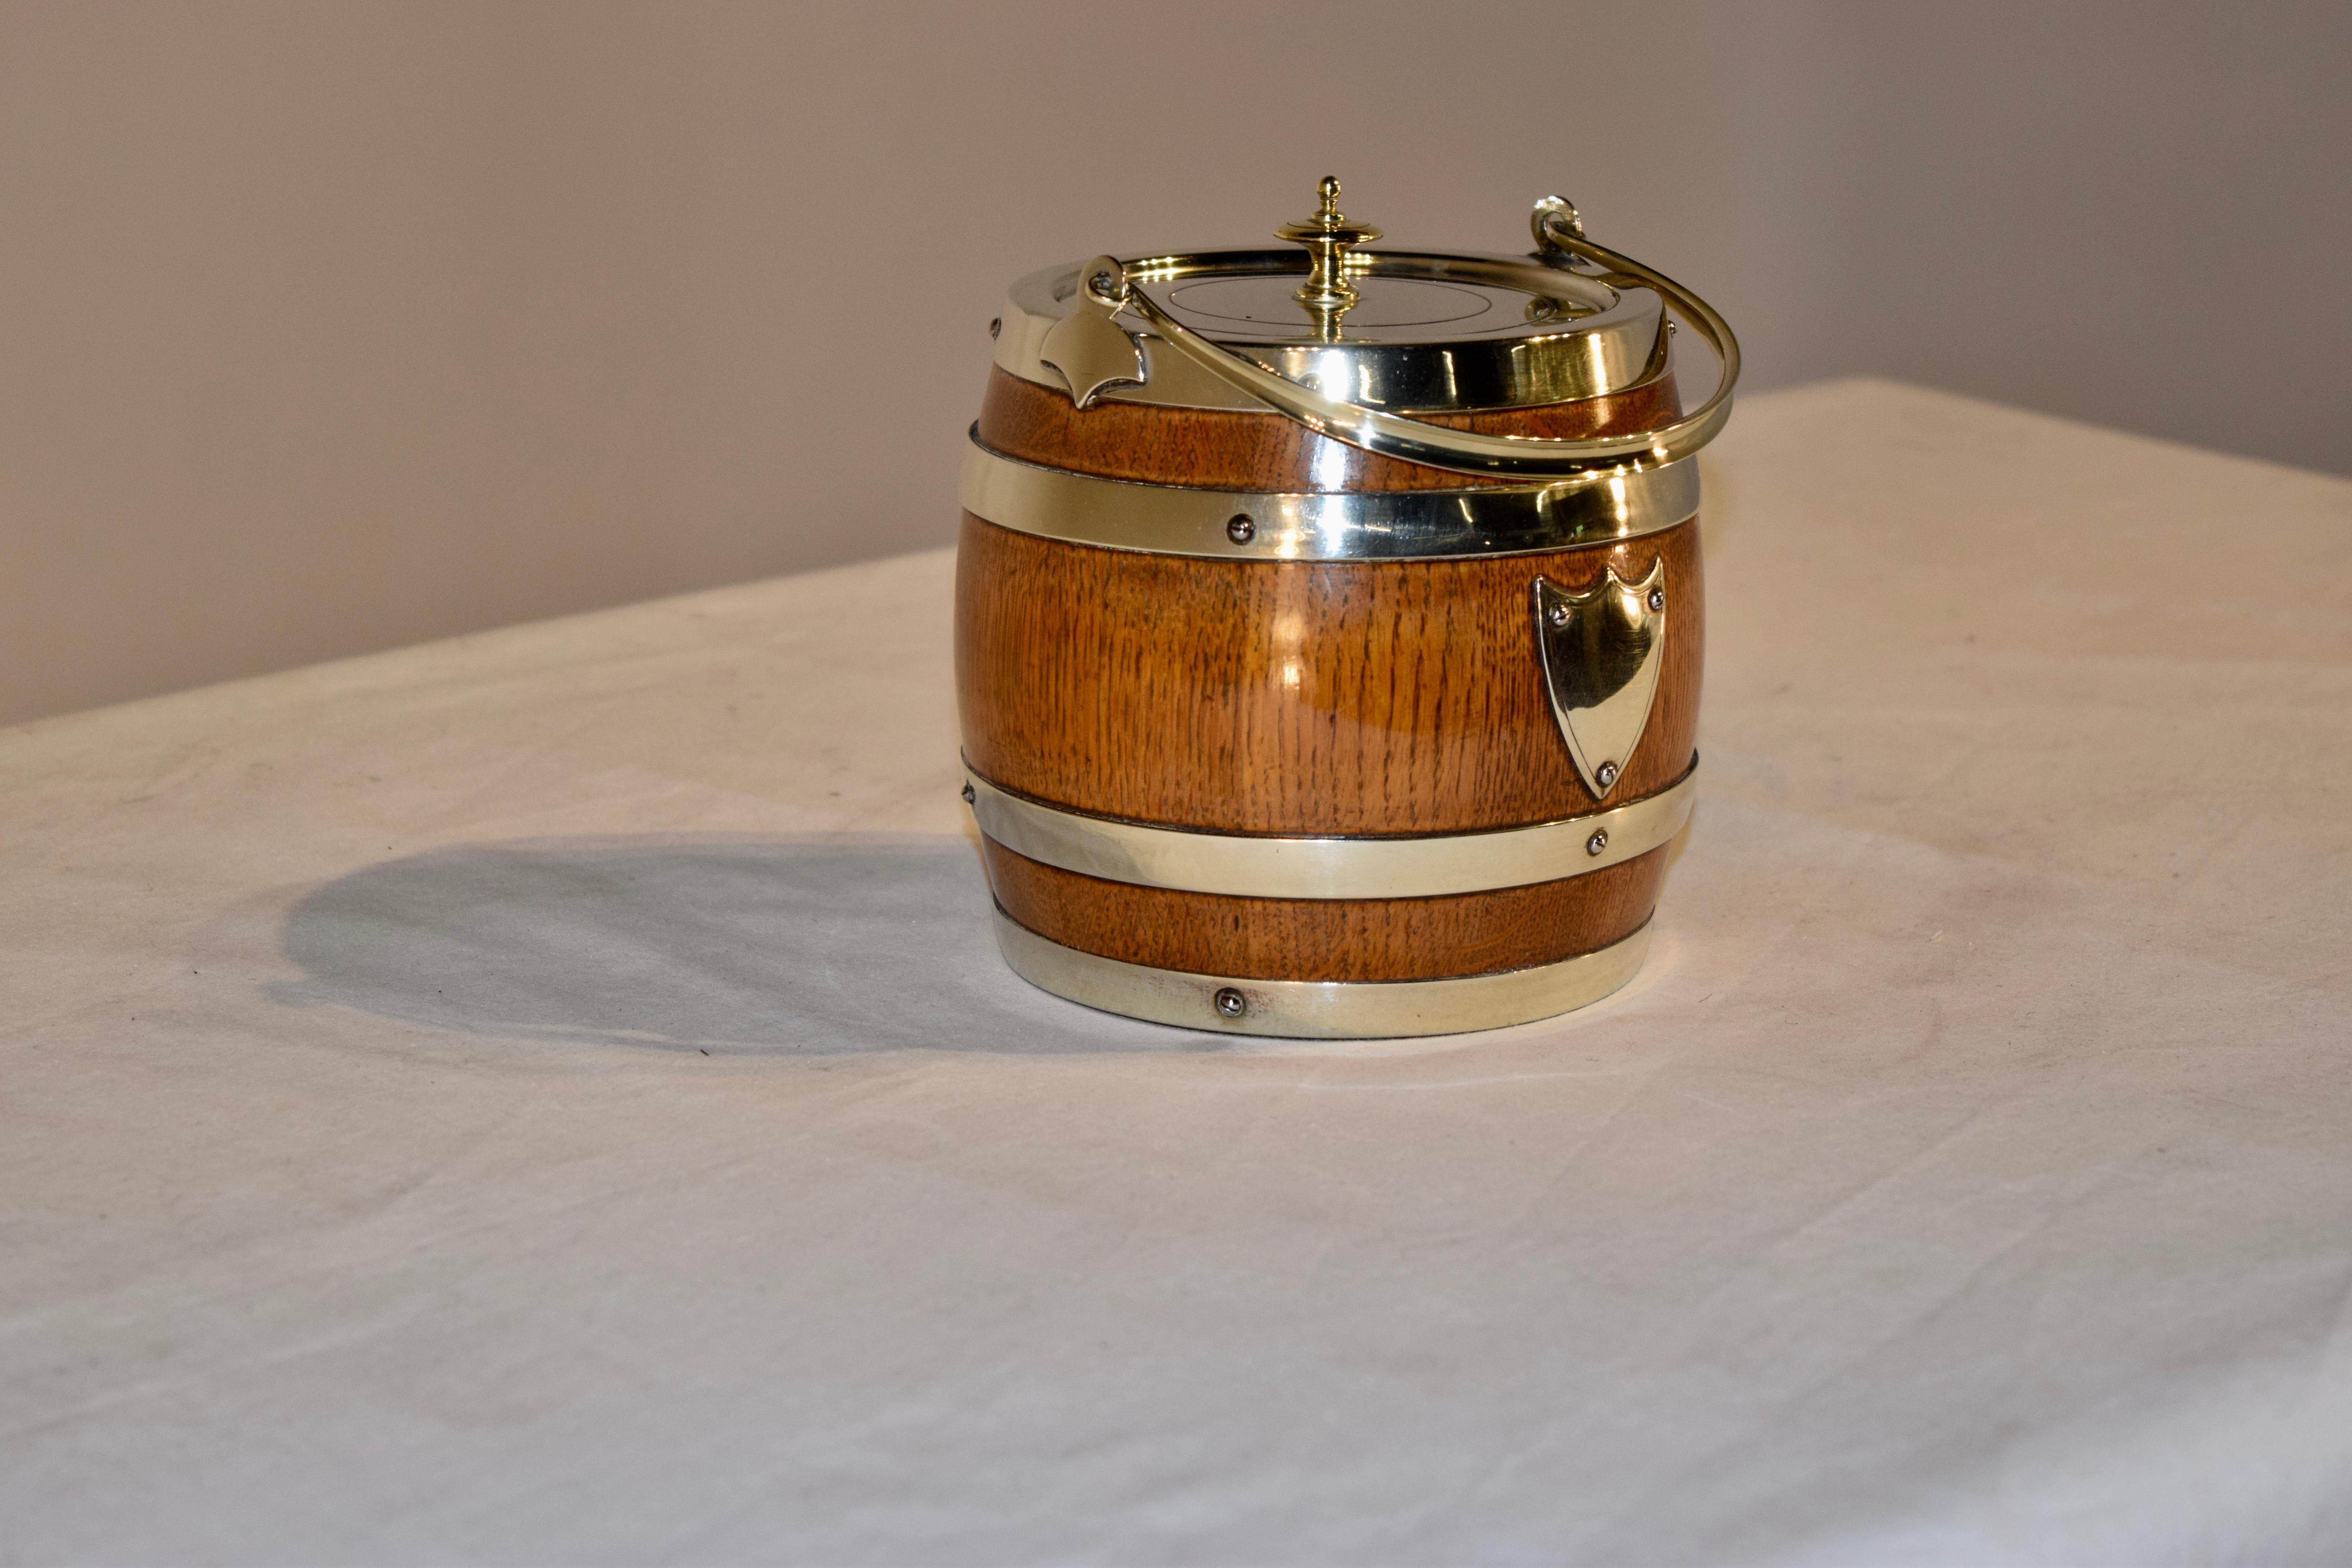 English oak biscuit barrel which retains its original porcelain liner and is banded and decorated with silver plate. Wear to silver plate from many years of polishing.